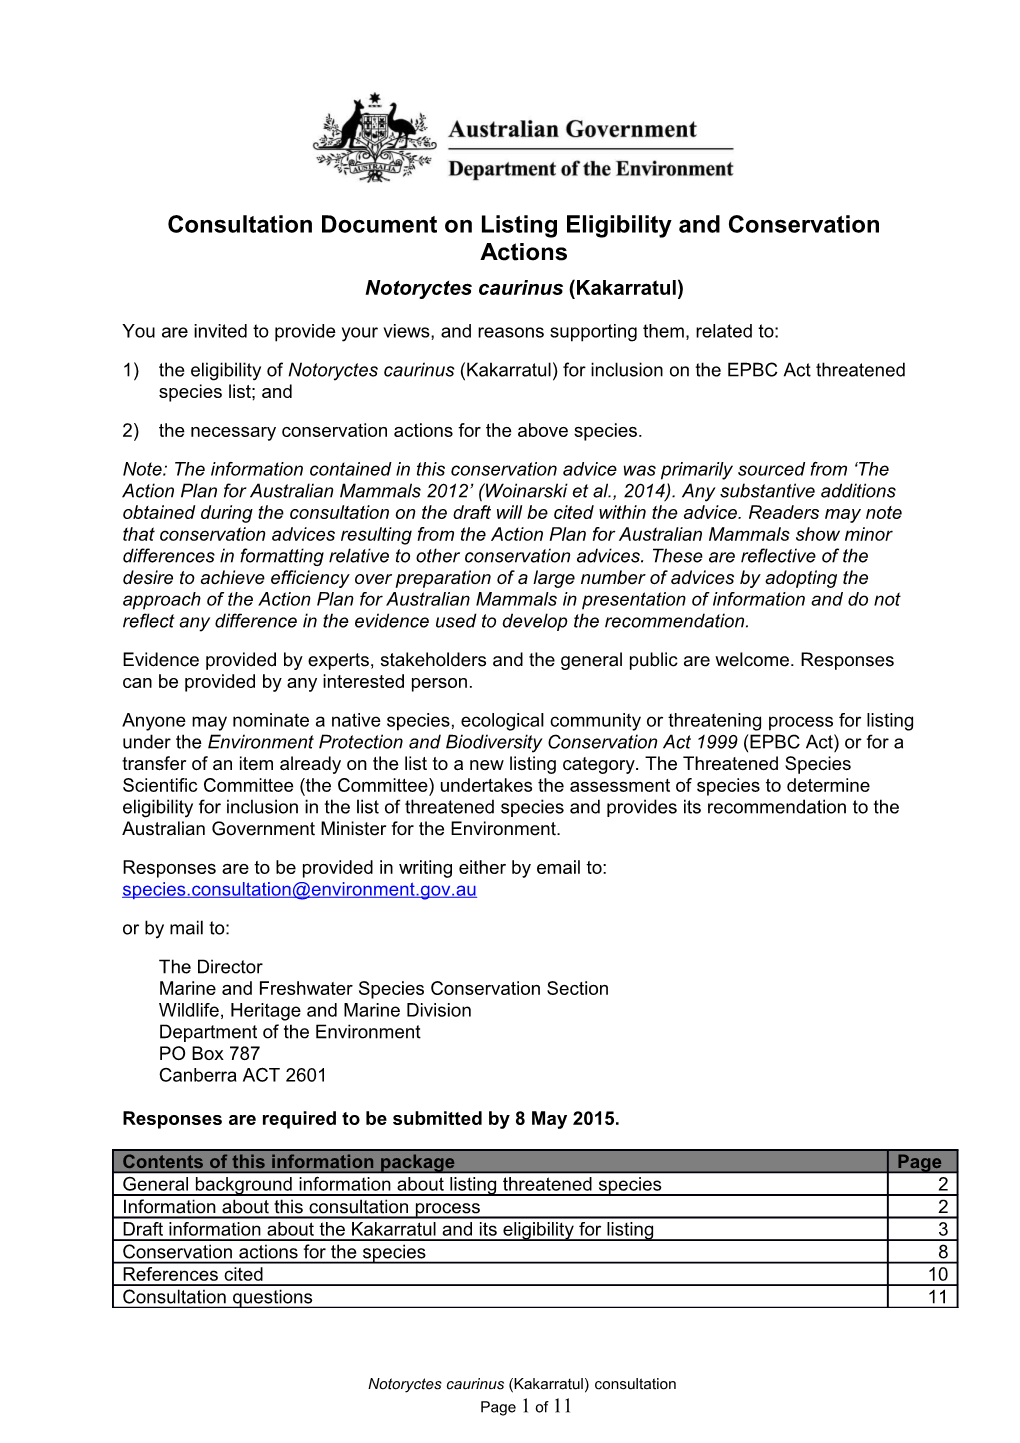 Consultation Document on Listing Eligibility and Conservation Actions - Notoryctes Caurinus